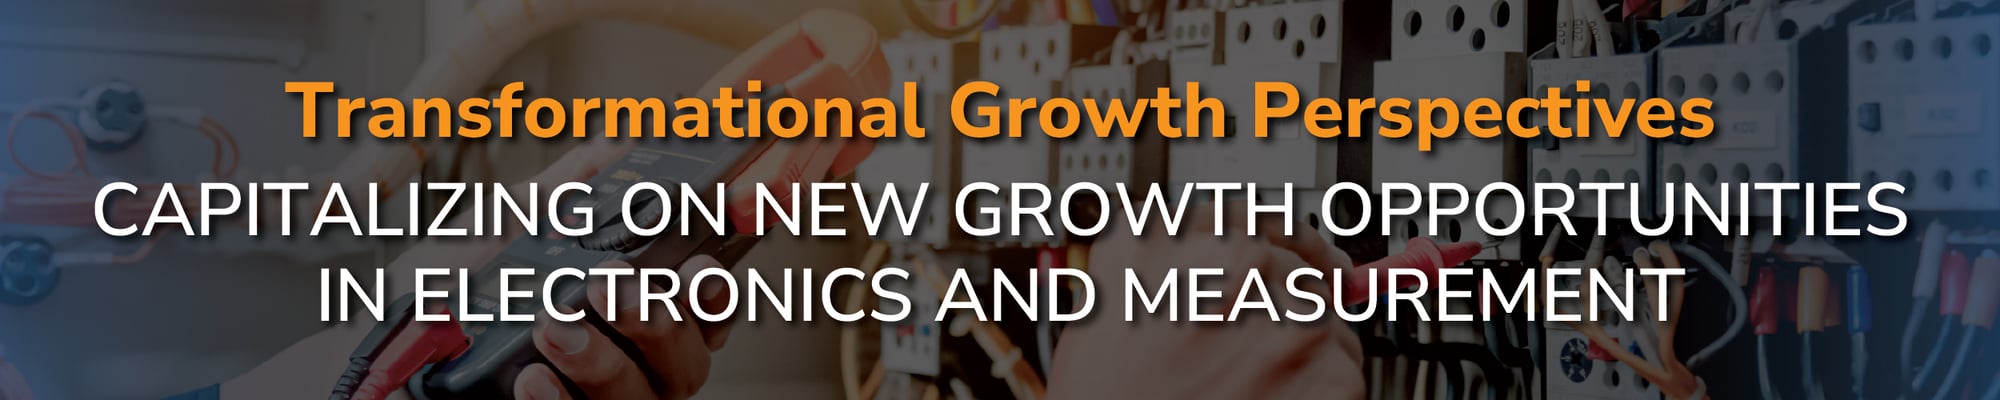 Transformational Growth Perspectives Capitalizing on New Growth Opportunities in Electronics and Measurement